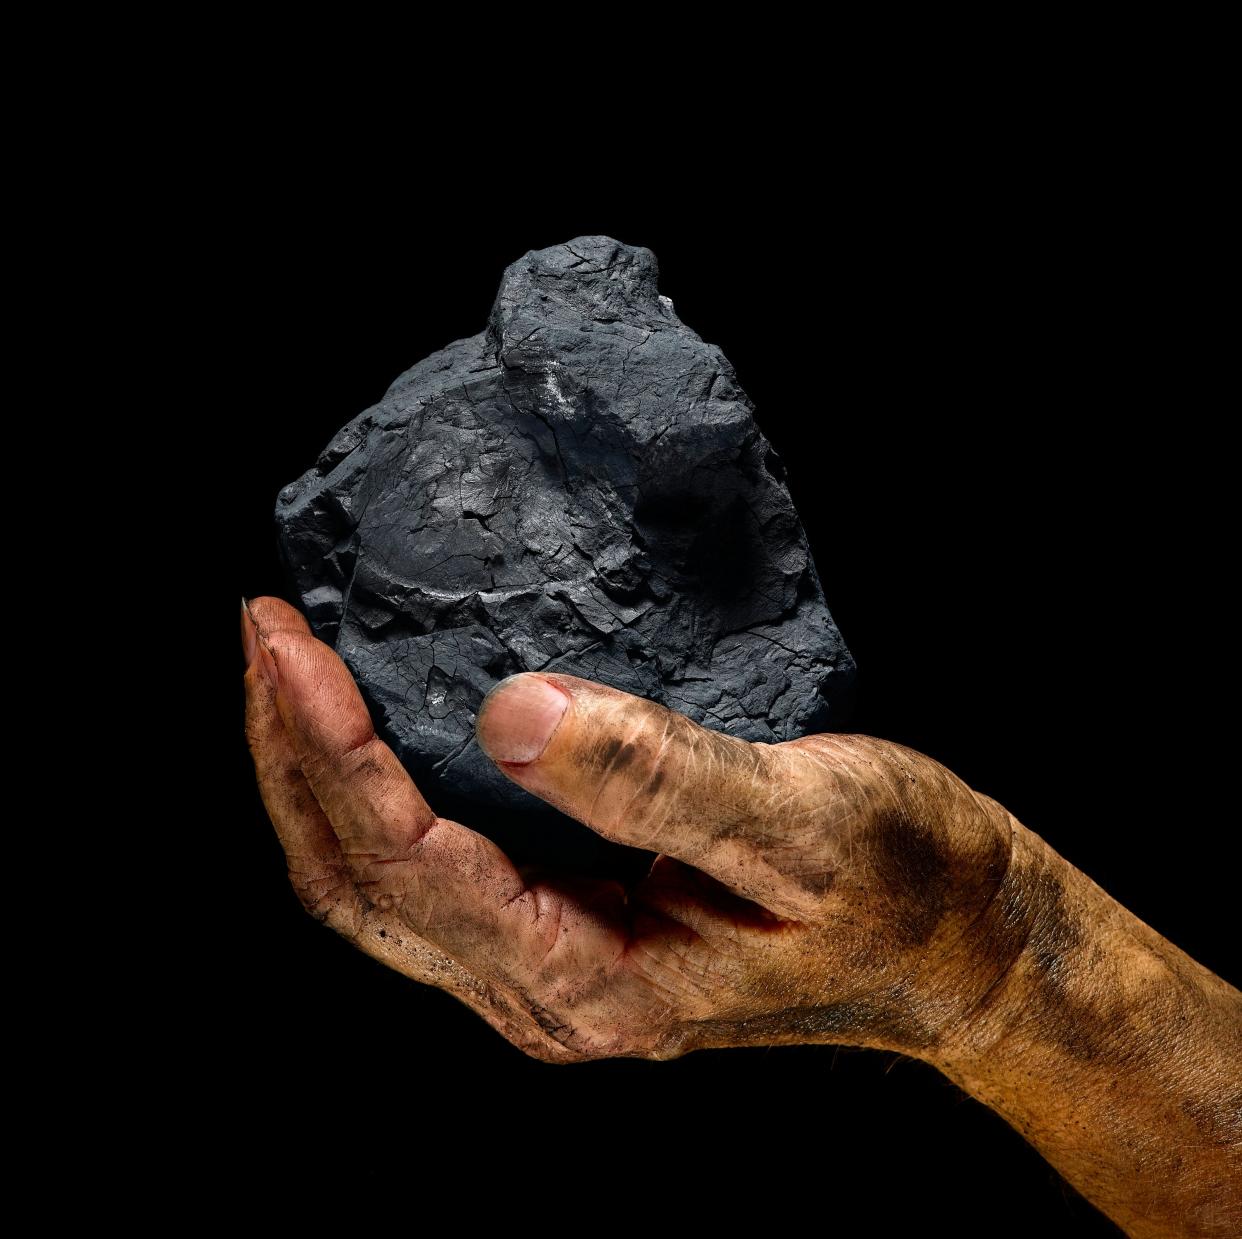 Coal has powered industrial revolutions, but at an enormous cost for climate change and human health. (Photo: Don Farrall via Getty Images)